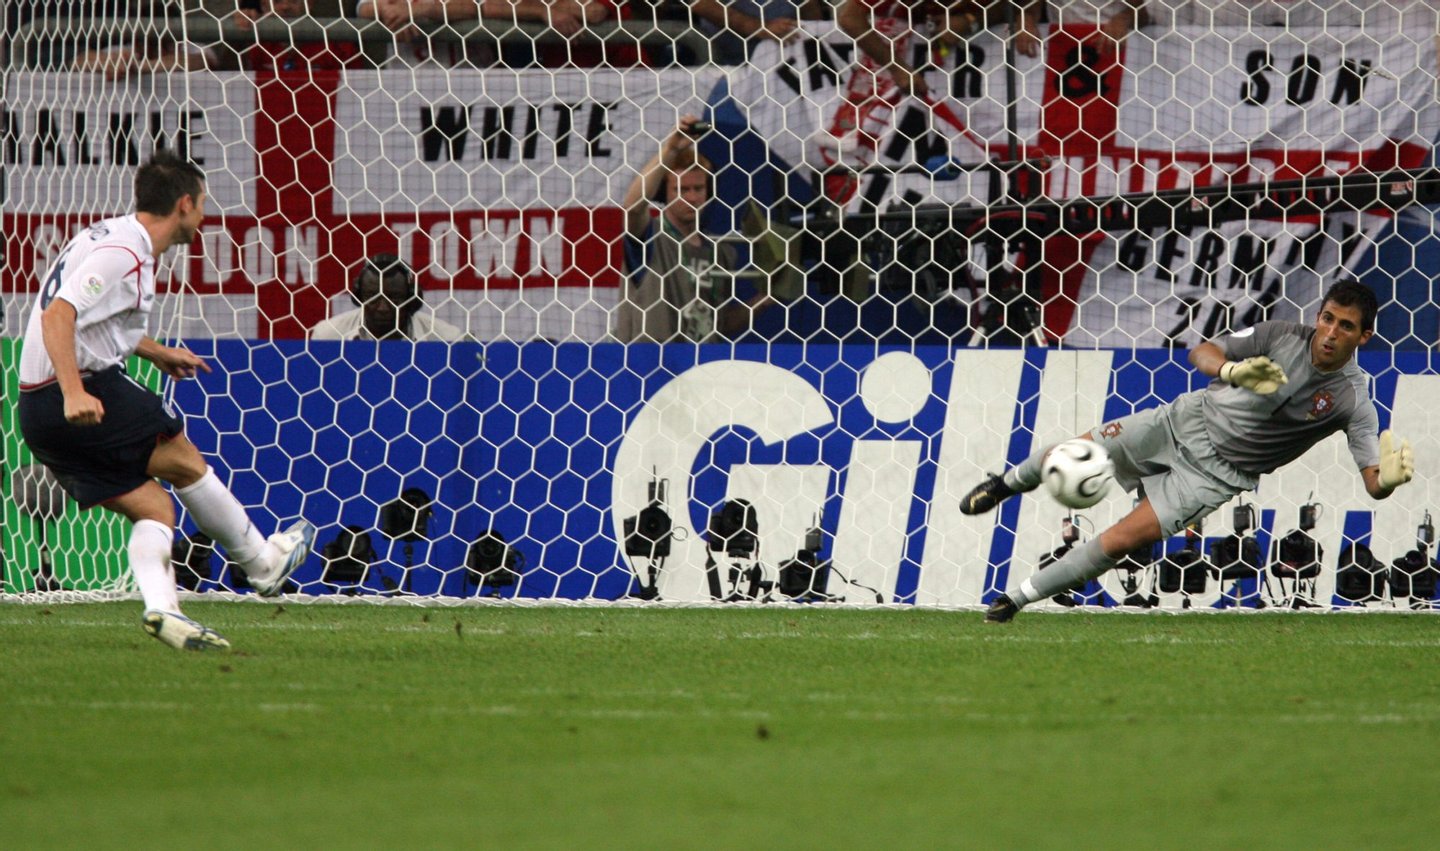 Portuguese goalkeeper Ricardo (R) saves a penalty kick of English midfielder Frank Lampard during the penalty kick of the World Cup 2006 quarter final football game England vs. Portugal, 01 July 2006 at Gelsenkirchen stadium. AFP PHOTO / ODD ANDERSEN (Photo credit should read ODD ANDERSEN/AFP/Getty Images)